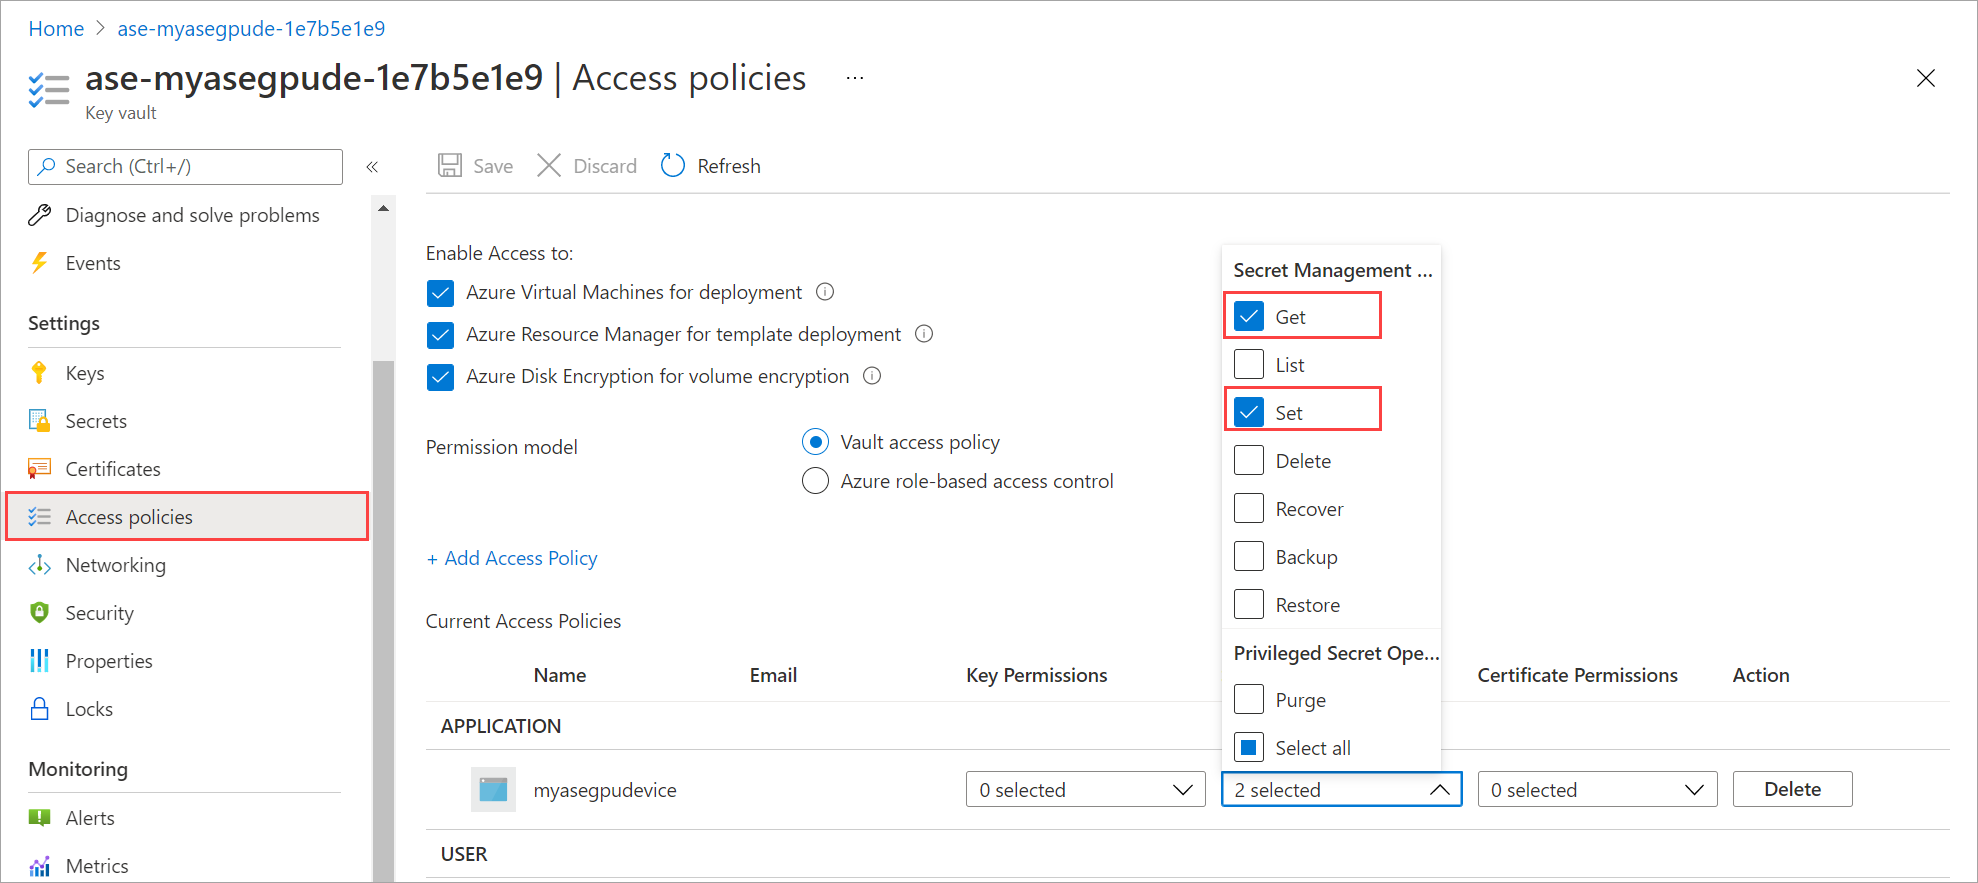 View access policies for key vault